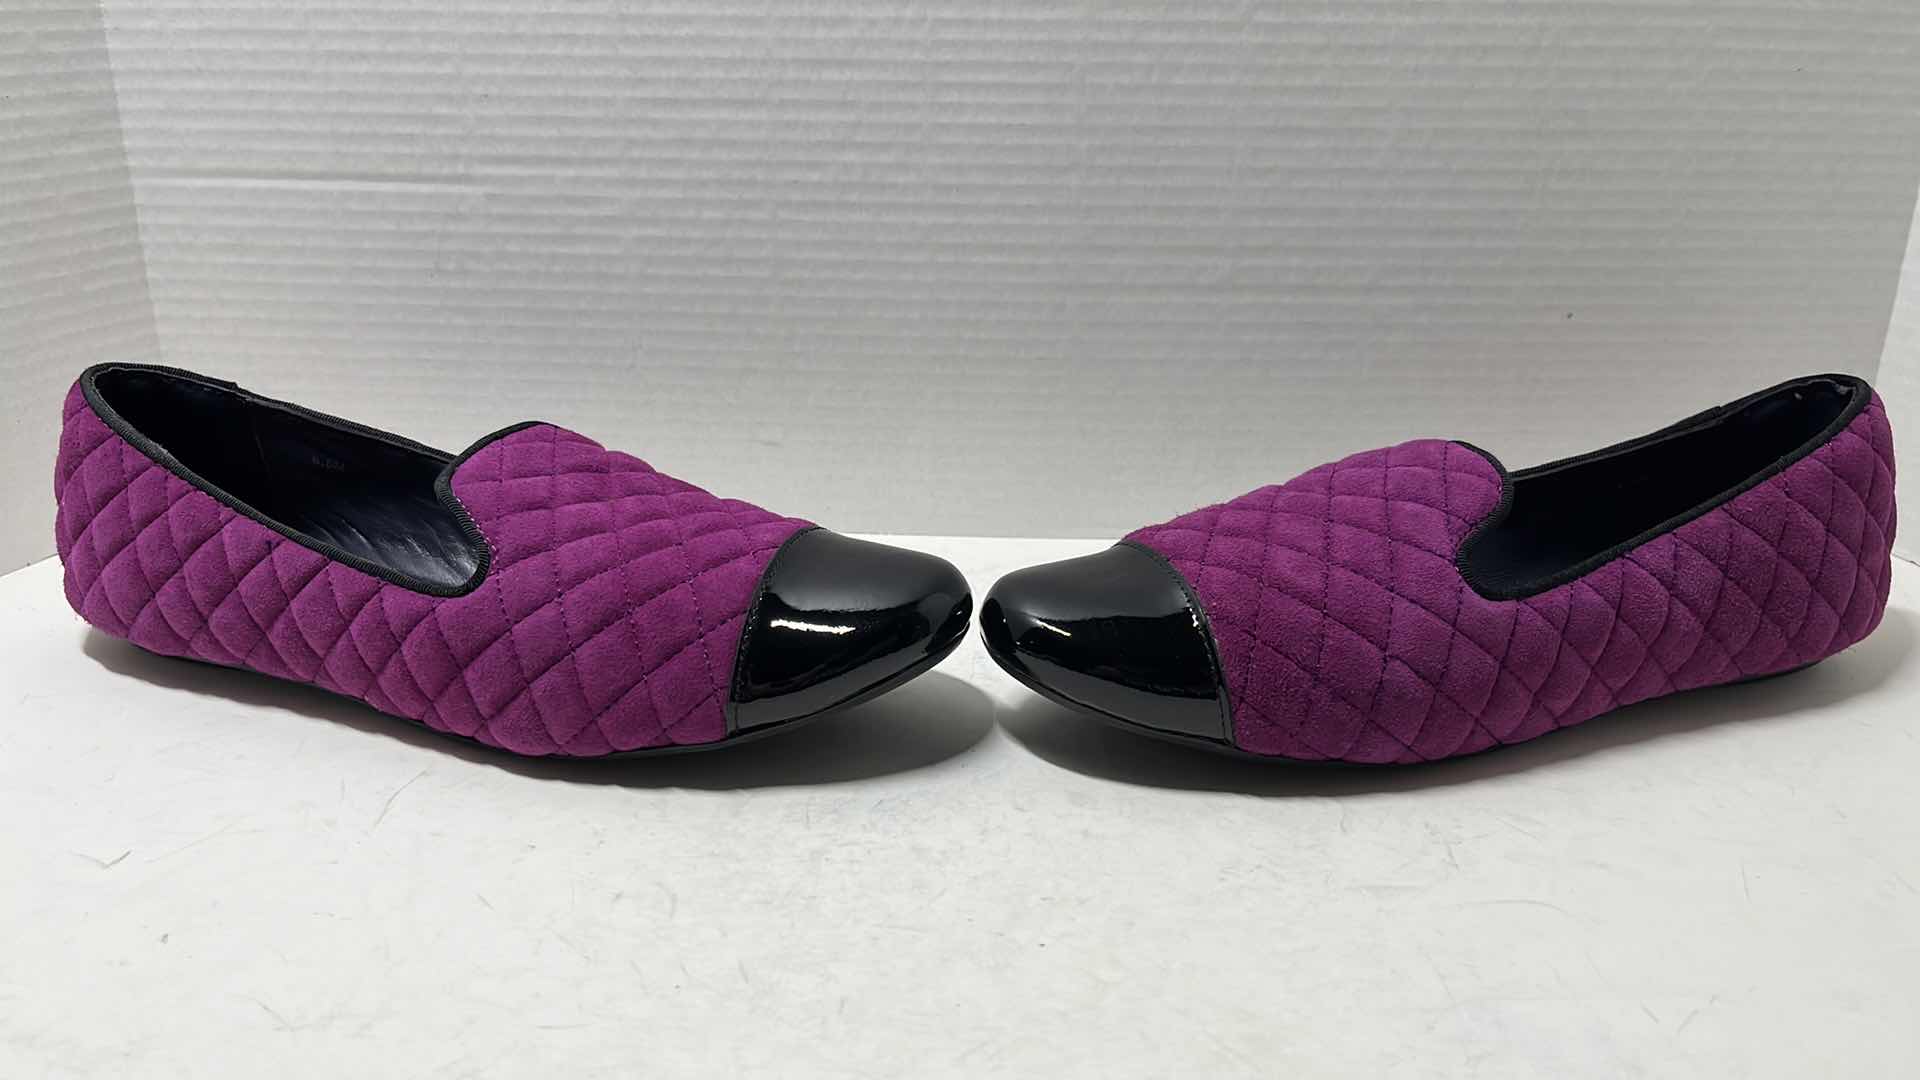 Photo 3 of VAN ELi BRUCIE QUILTED SUEDE SLIP-ON LOAFER, FUCHSIA PURPLE/BLACK PATENT (WOMENS SIZE 9.5)